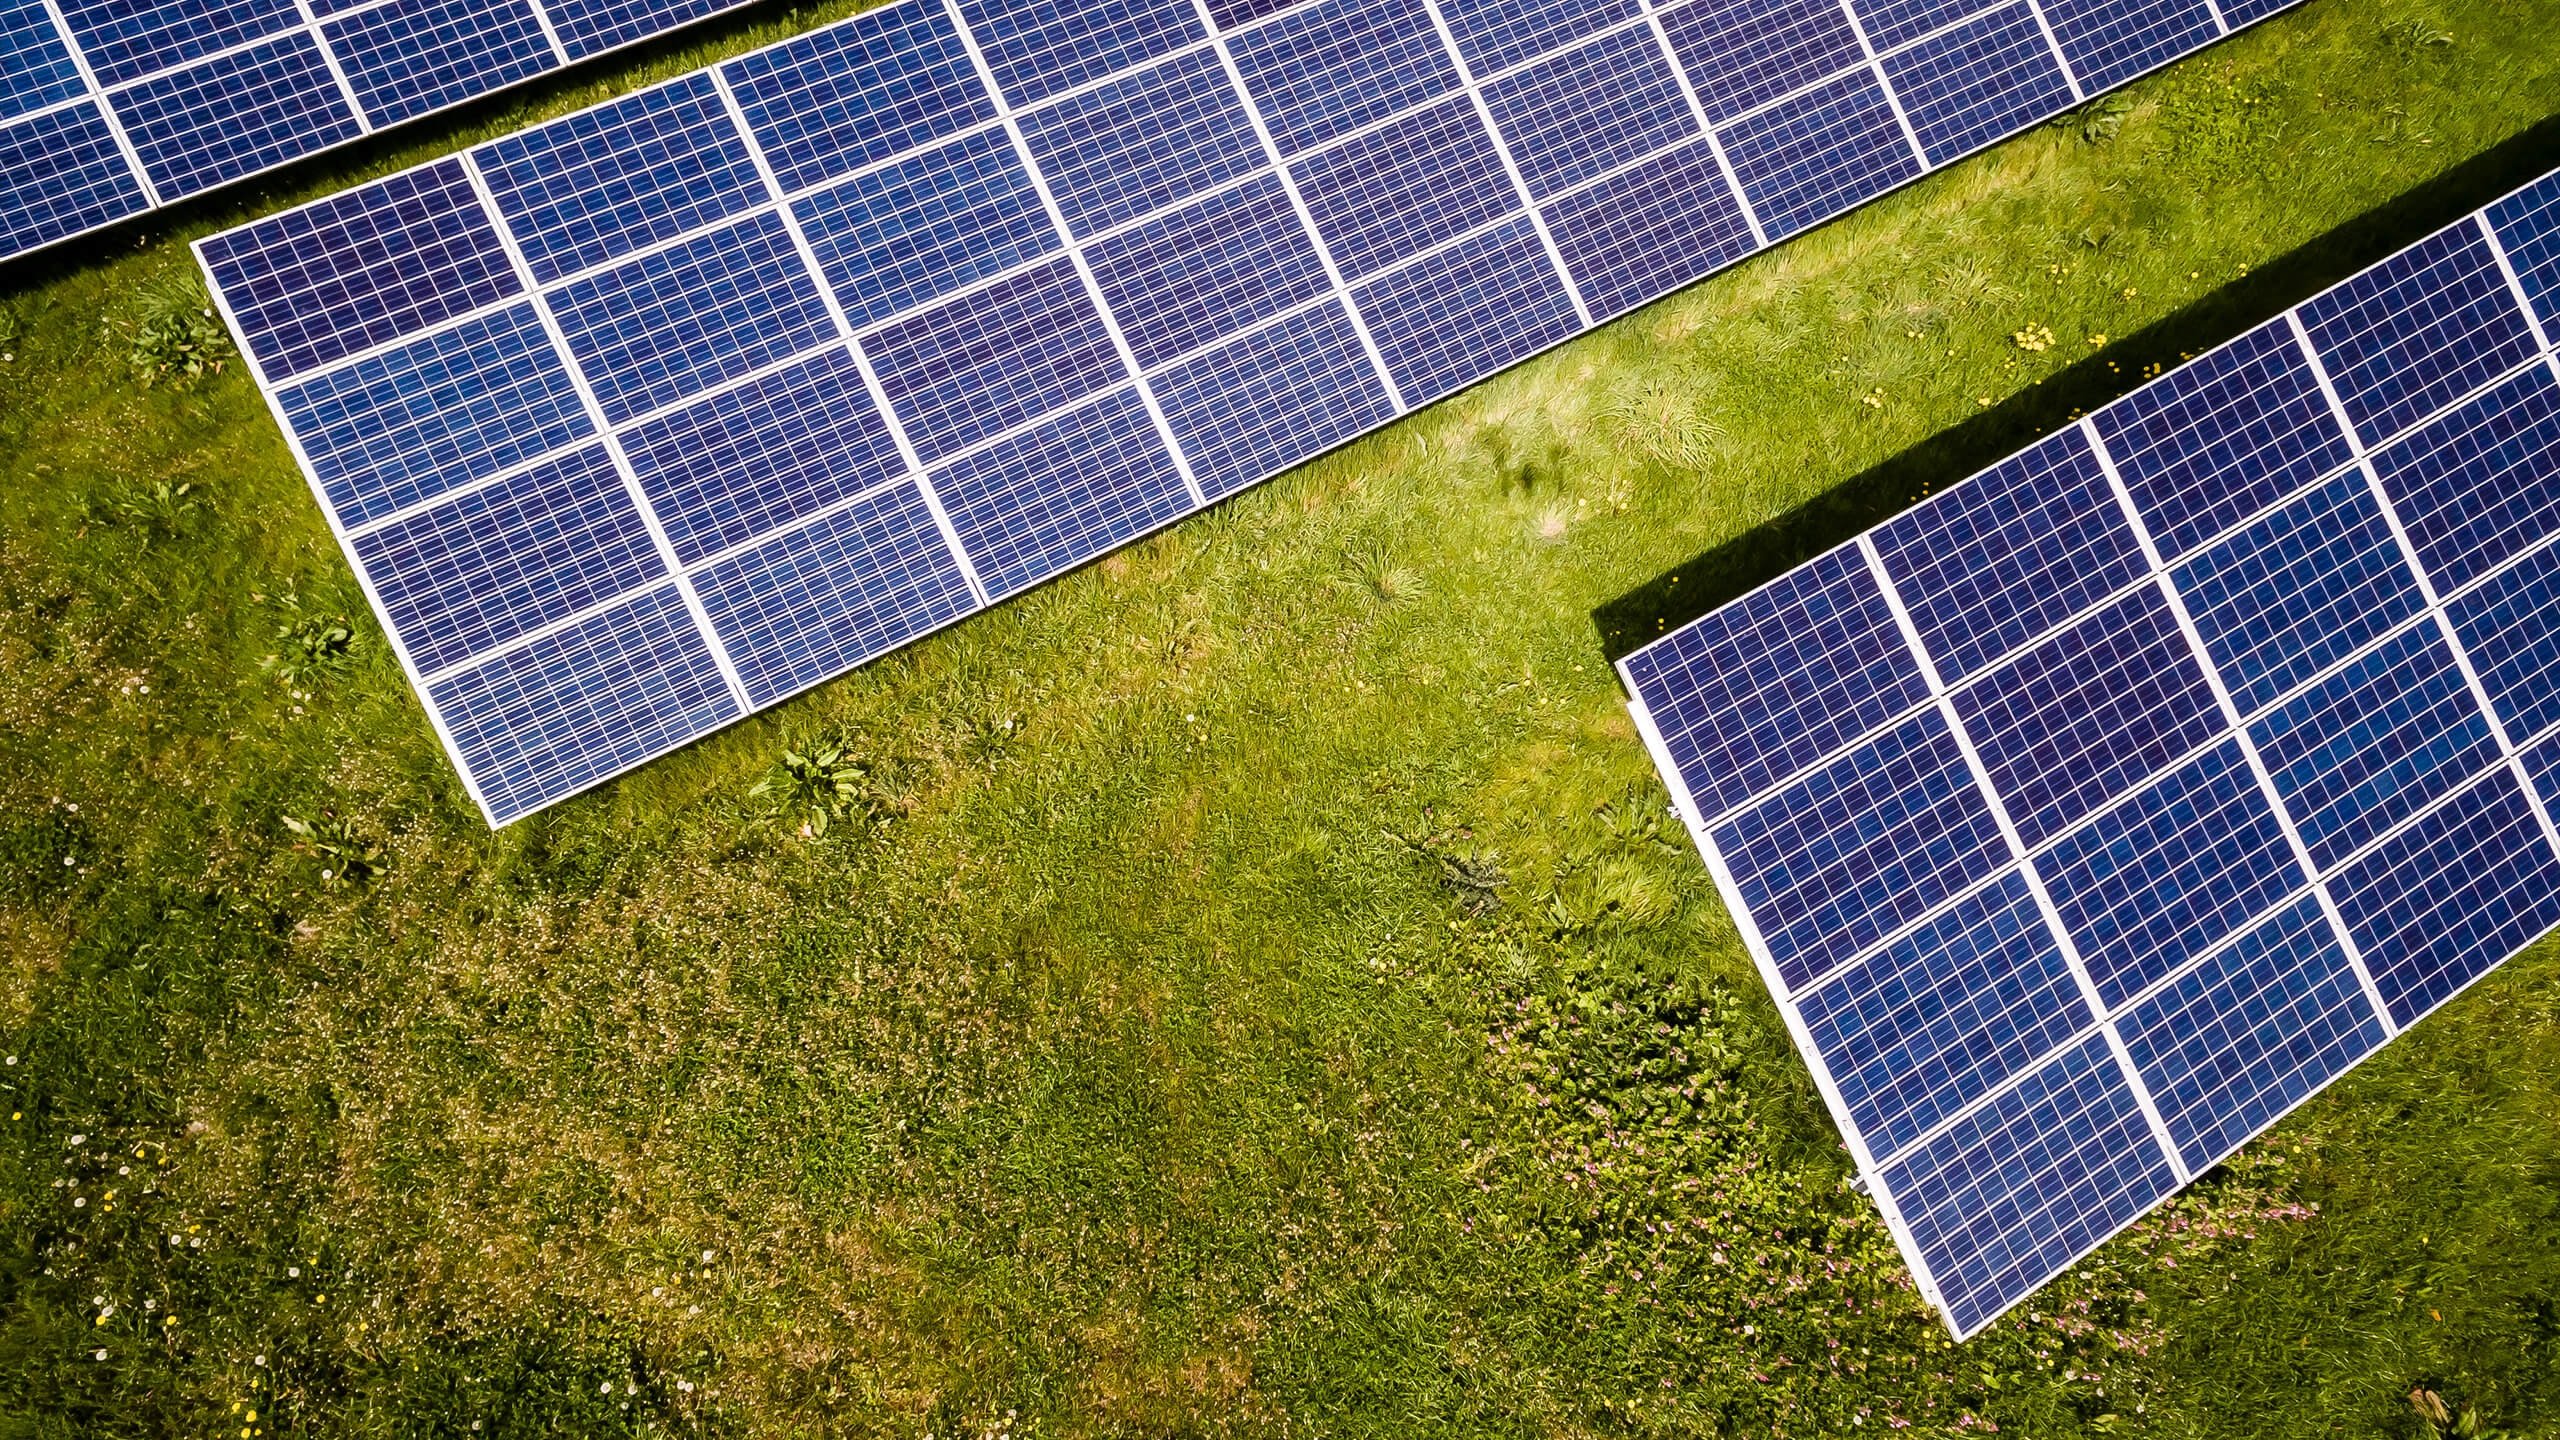 Learn Now “How to Clean Solar Panels Yourself” in 6 steps